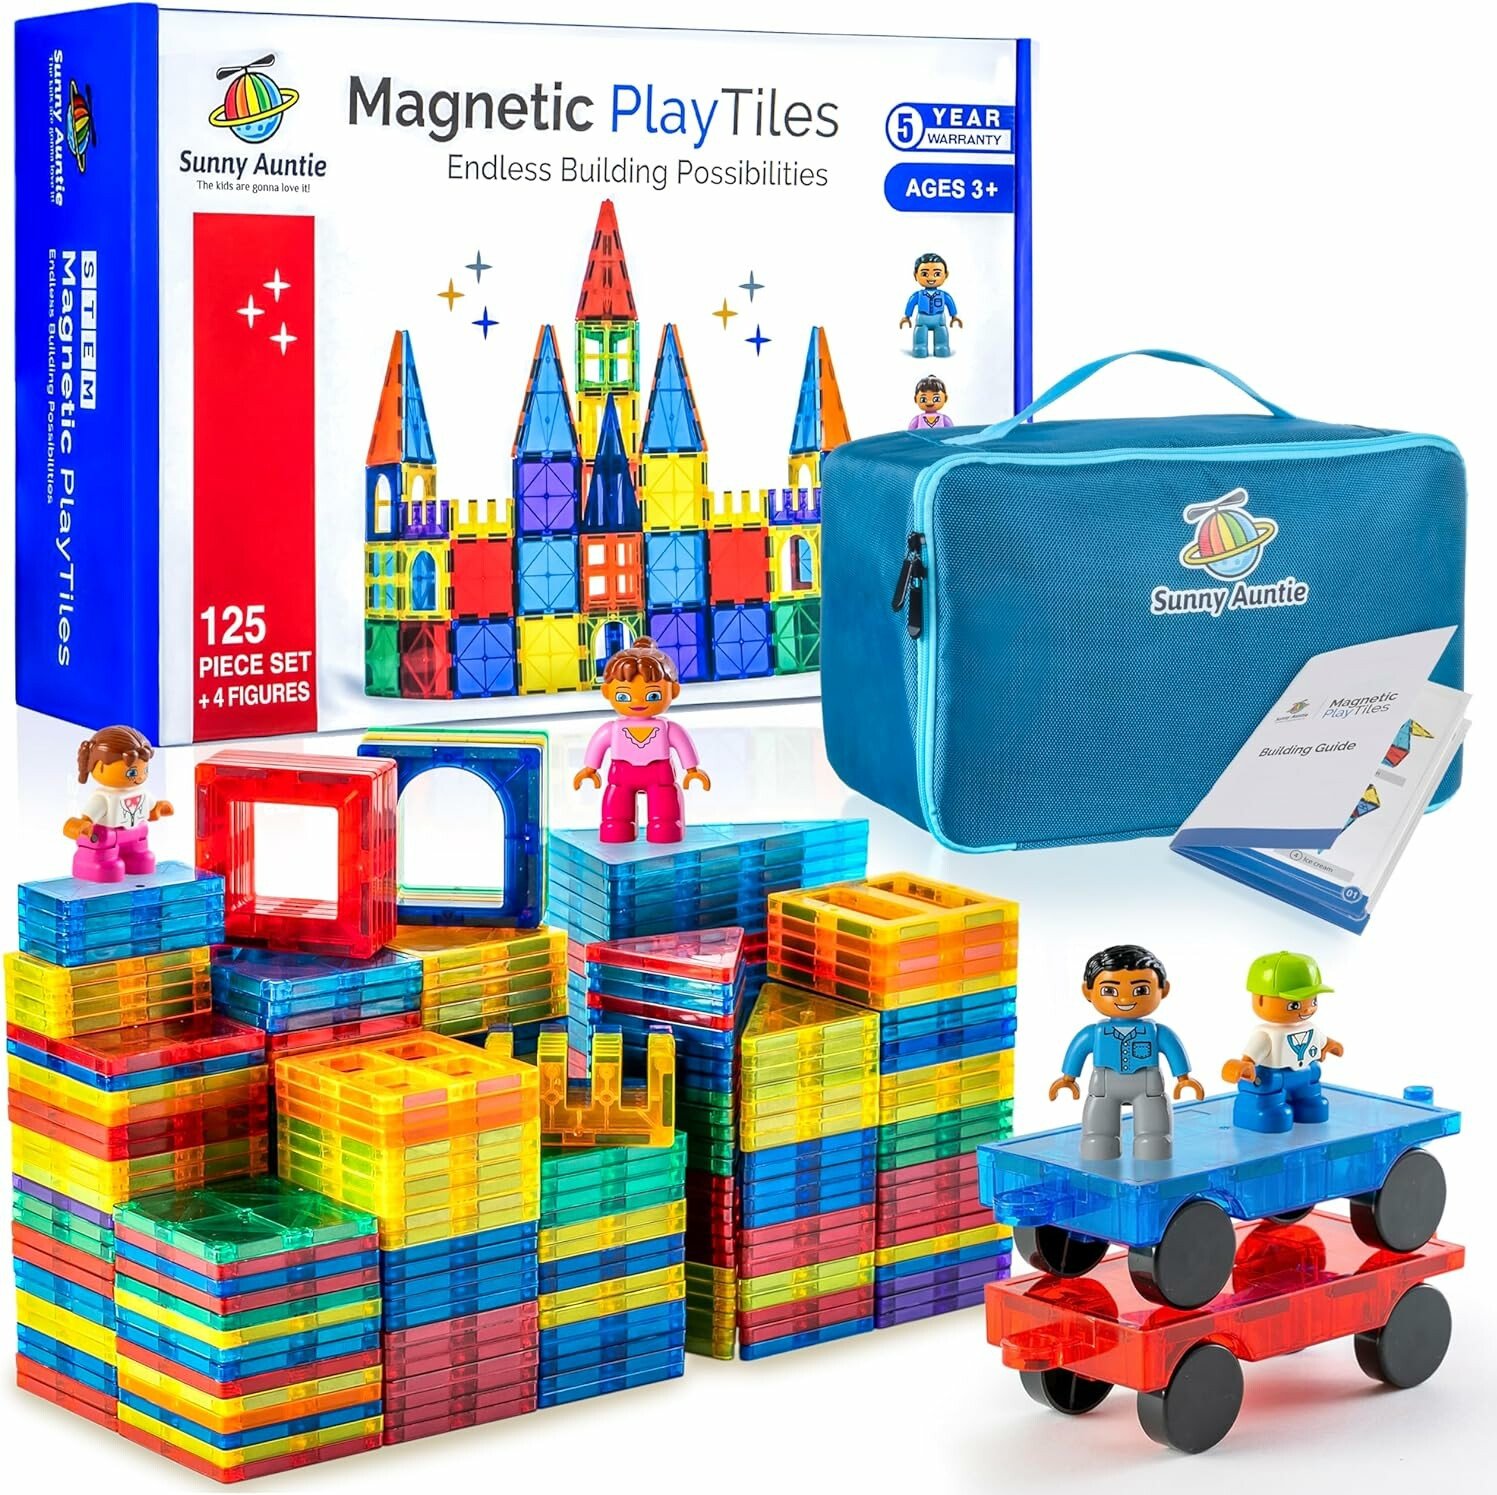 Magnetic Play Tiles